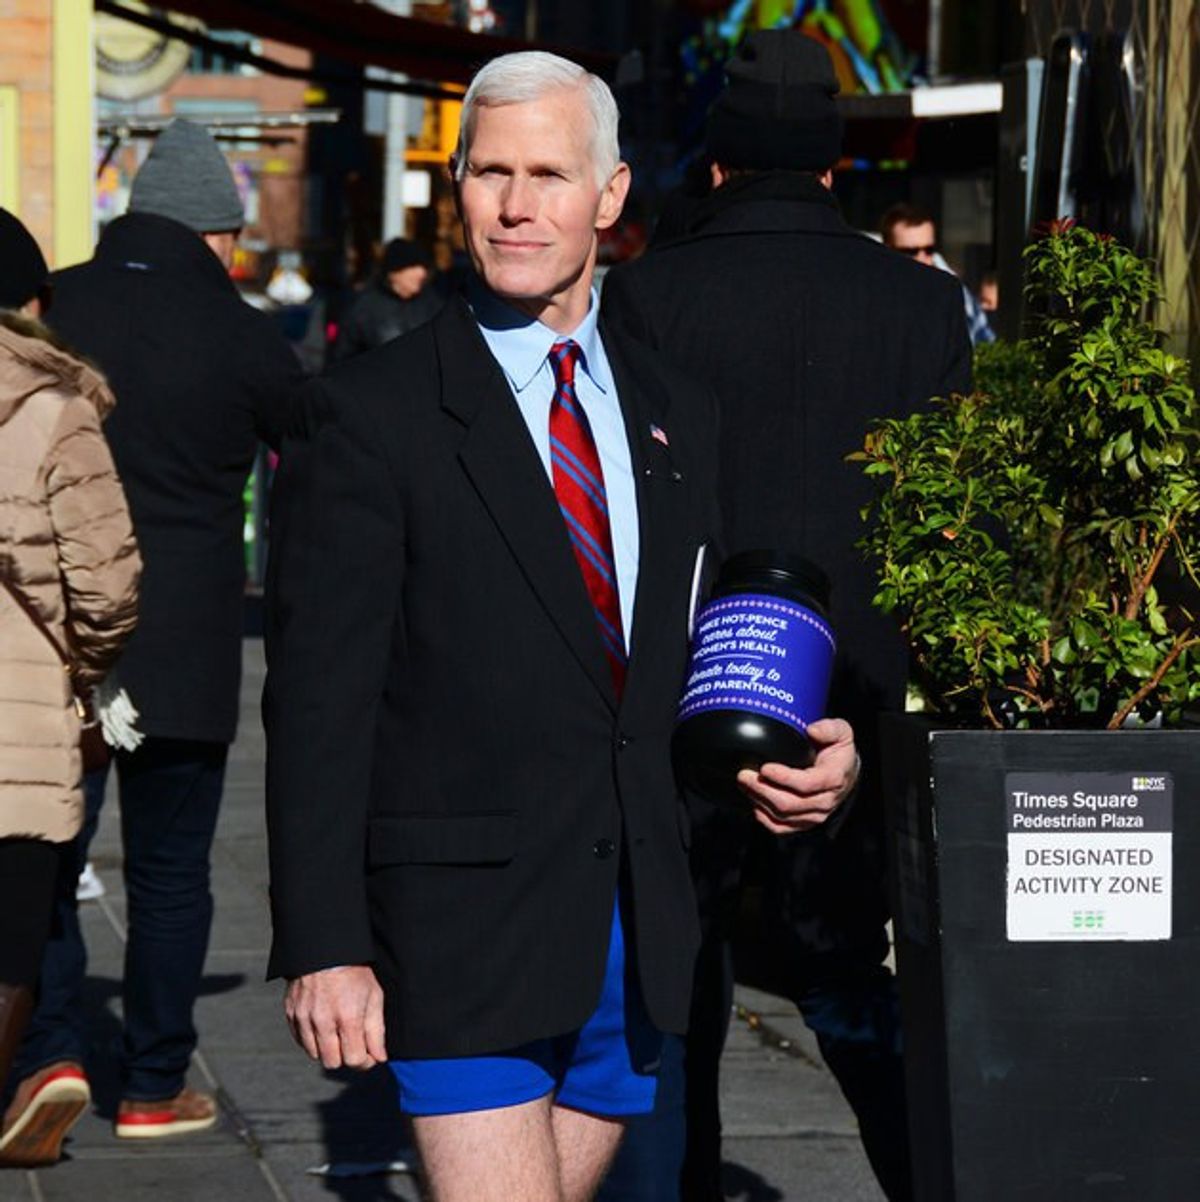 Gay Mike Pence Lookalike Collects Donations for Planned Parenthood, LGBTQ+ Causes